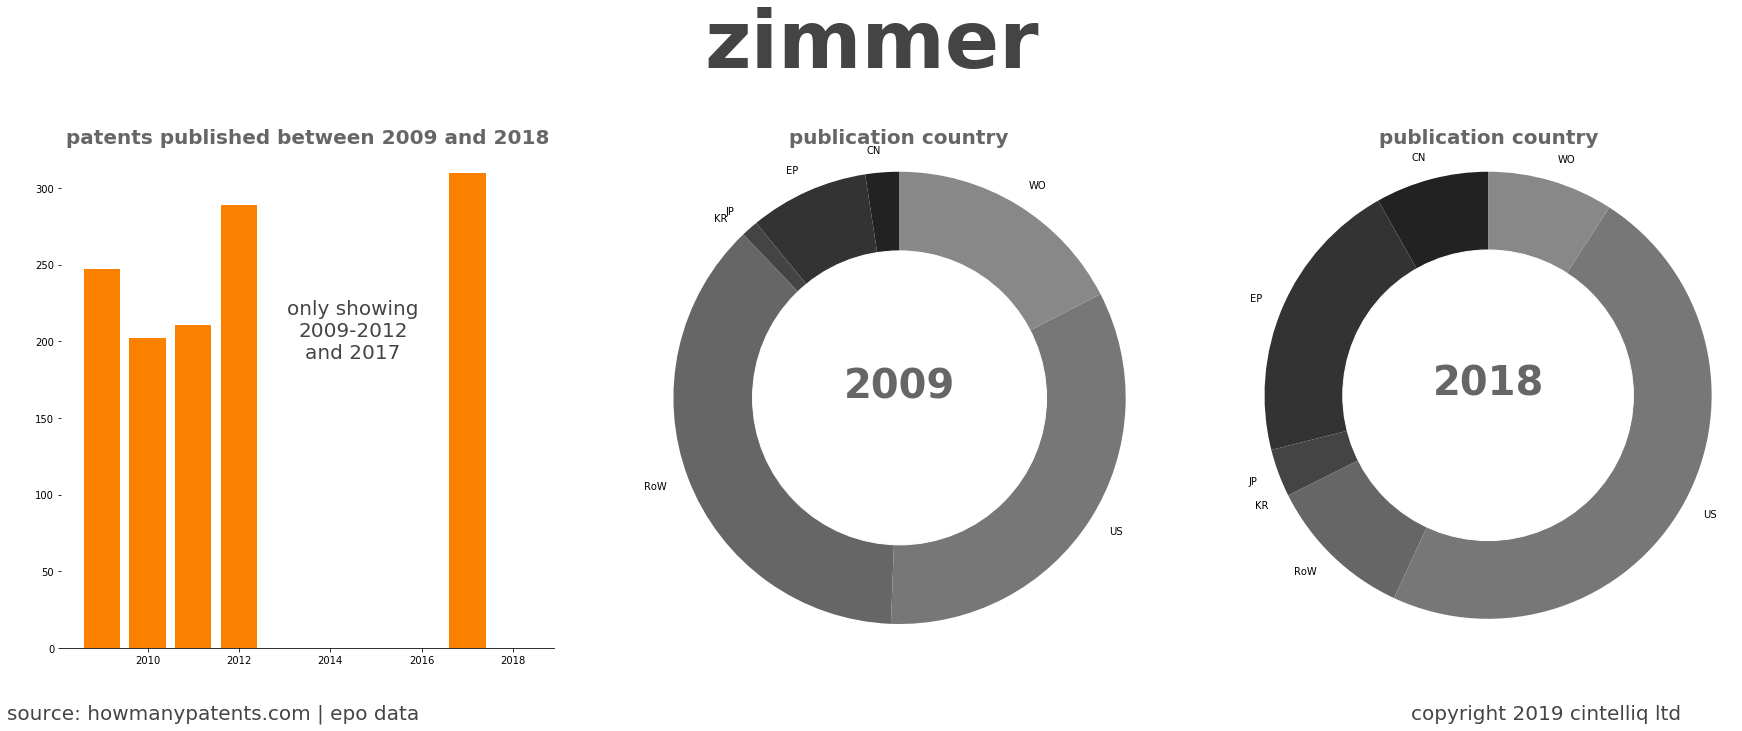 summary of patents for Zimmer